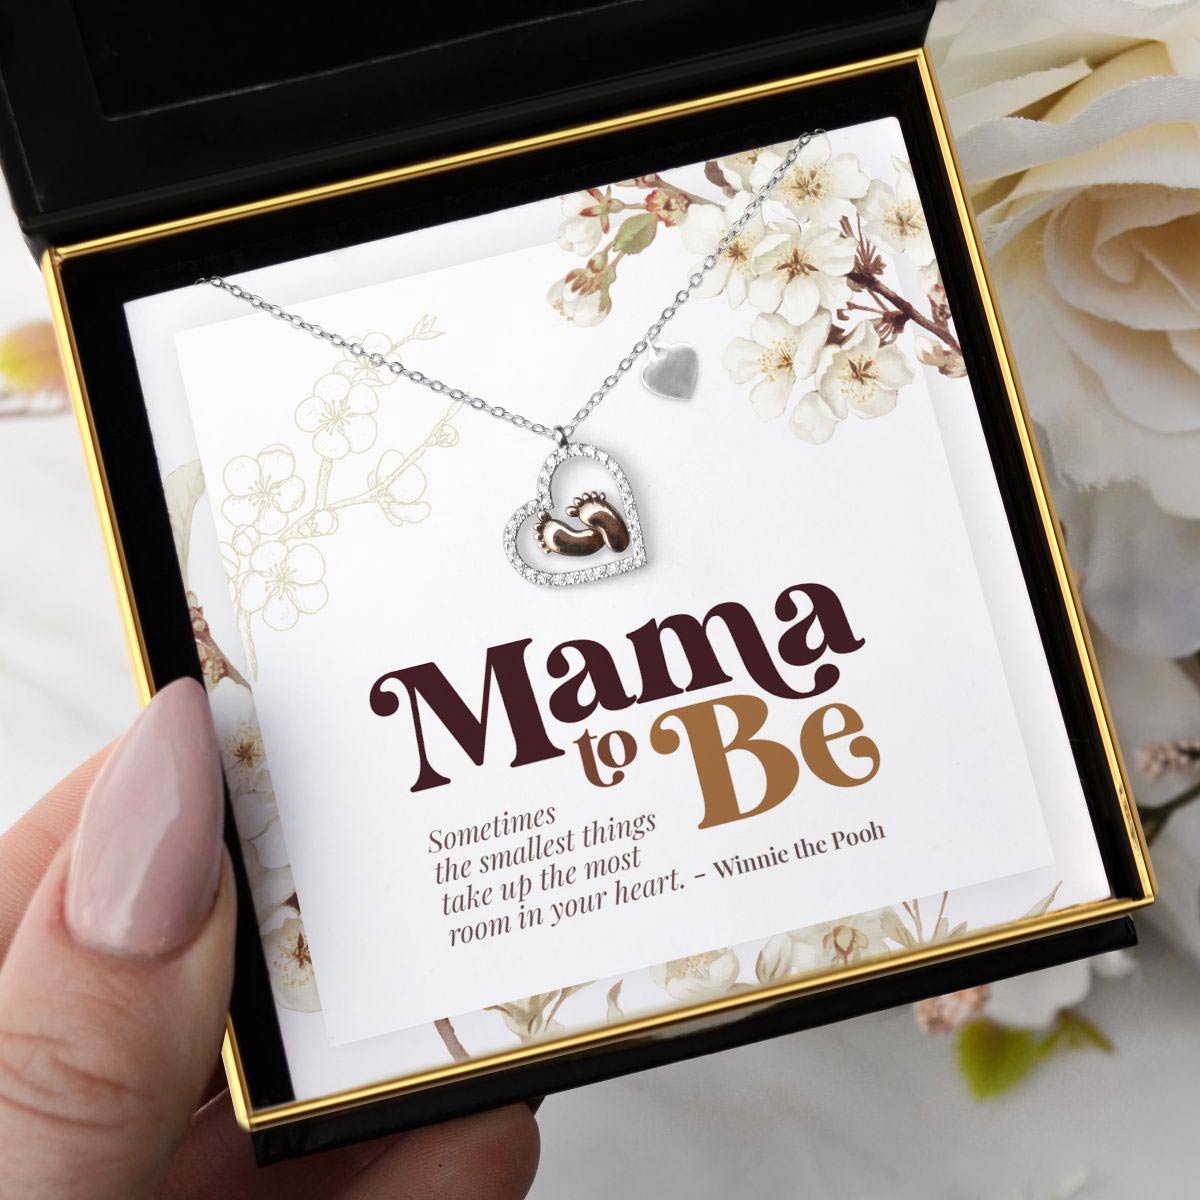 Mama To Be - Baby Feet Necklace Gift Set